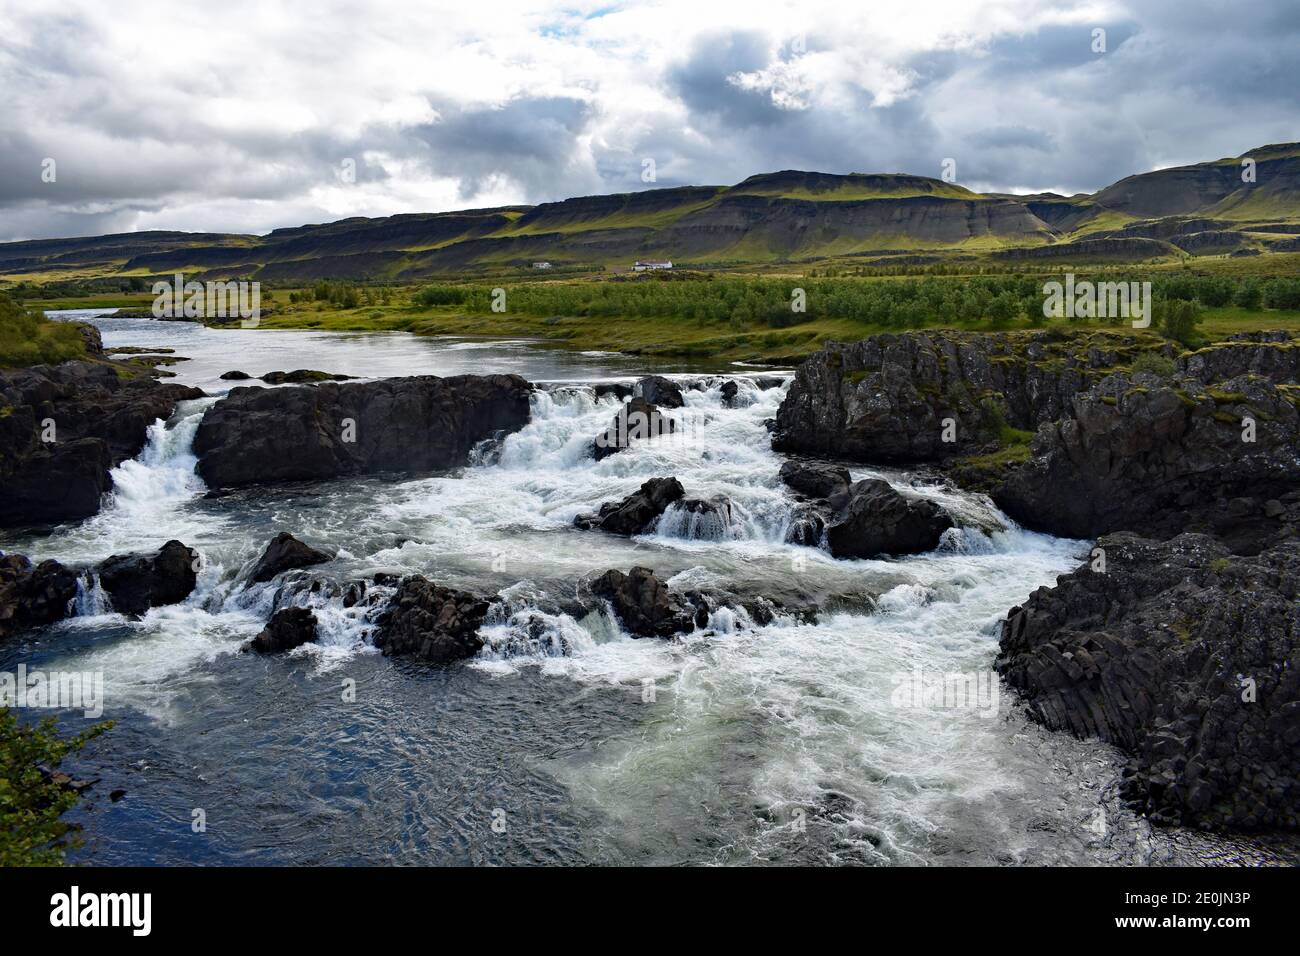 Glanni Waterfall on the Norðurá River in Western Iceland.  Water flows over the black lava rock and mountains rise from the river banks. Stock Photo